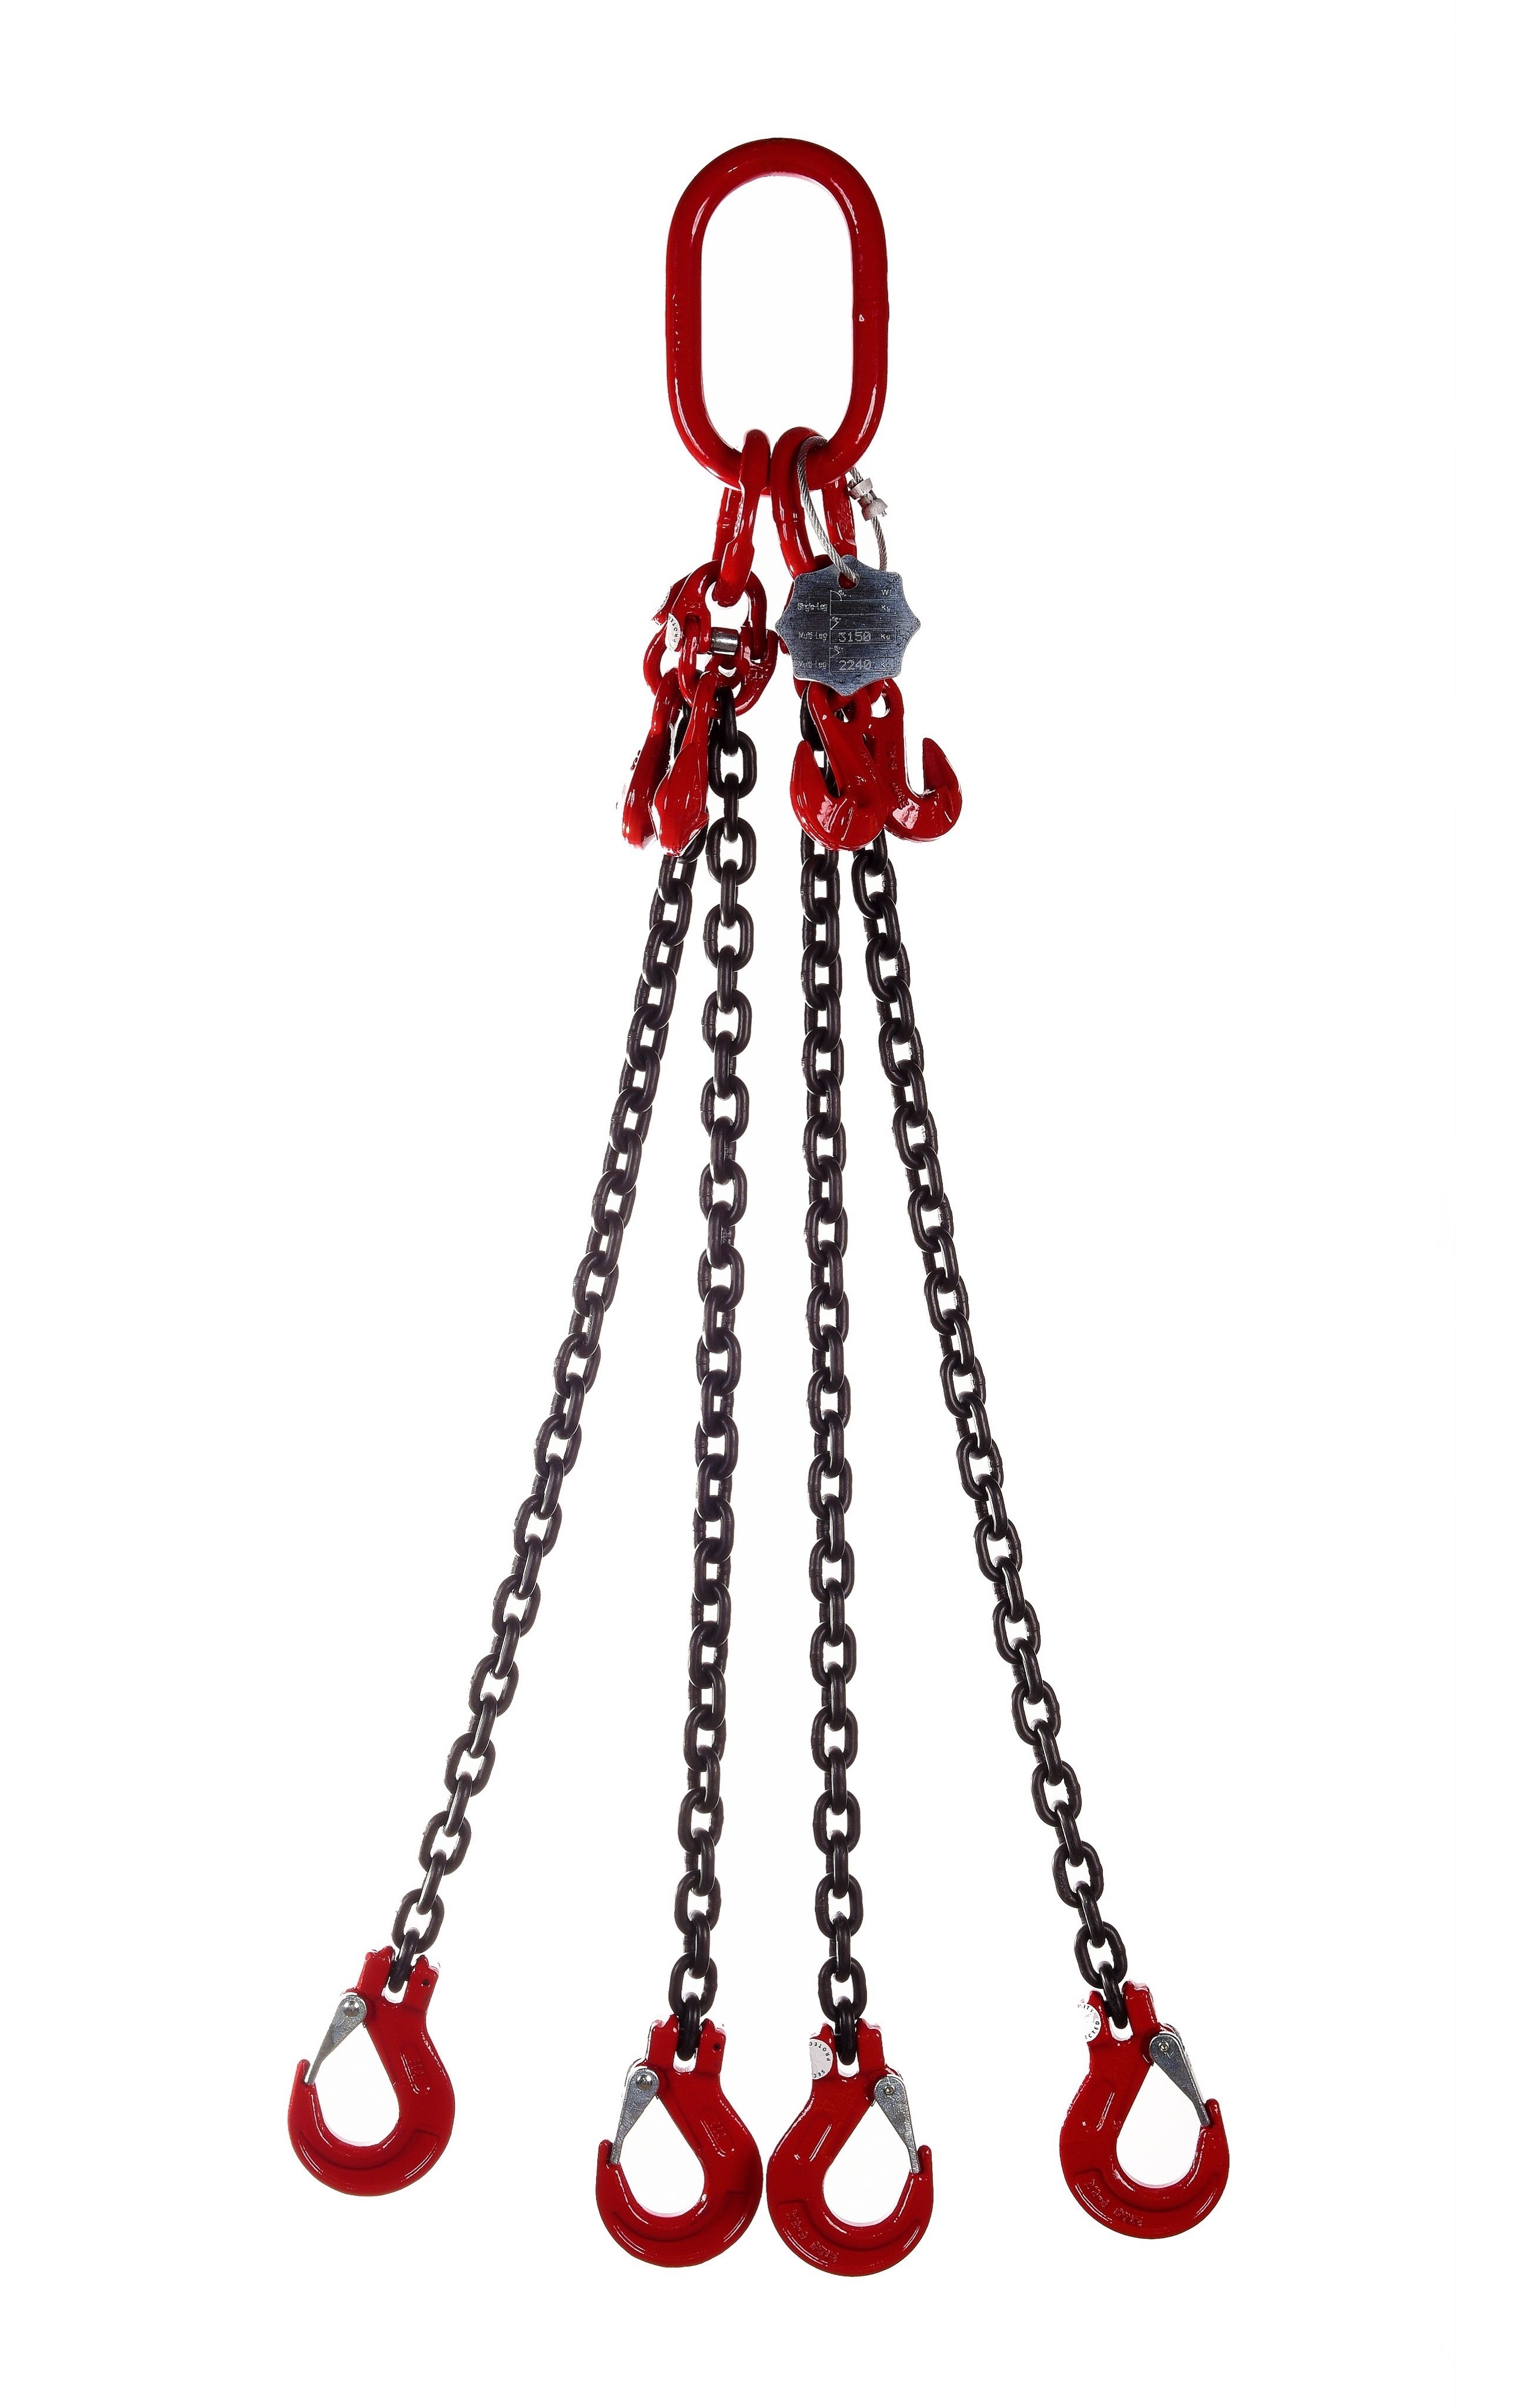 4 Leg 23.6tonne 19mm Lifting Chain Sling with choice of length and hooks – With Shortening Hook – 8mtr – Clevis Safety Hook – Chain Slings – WSB